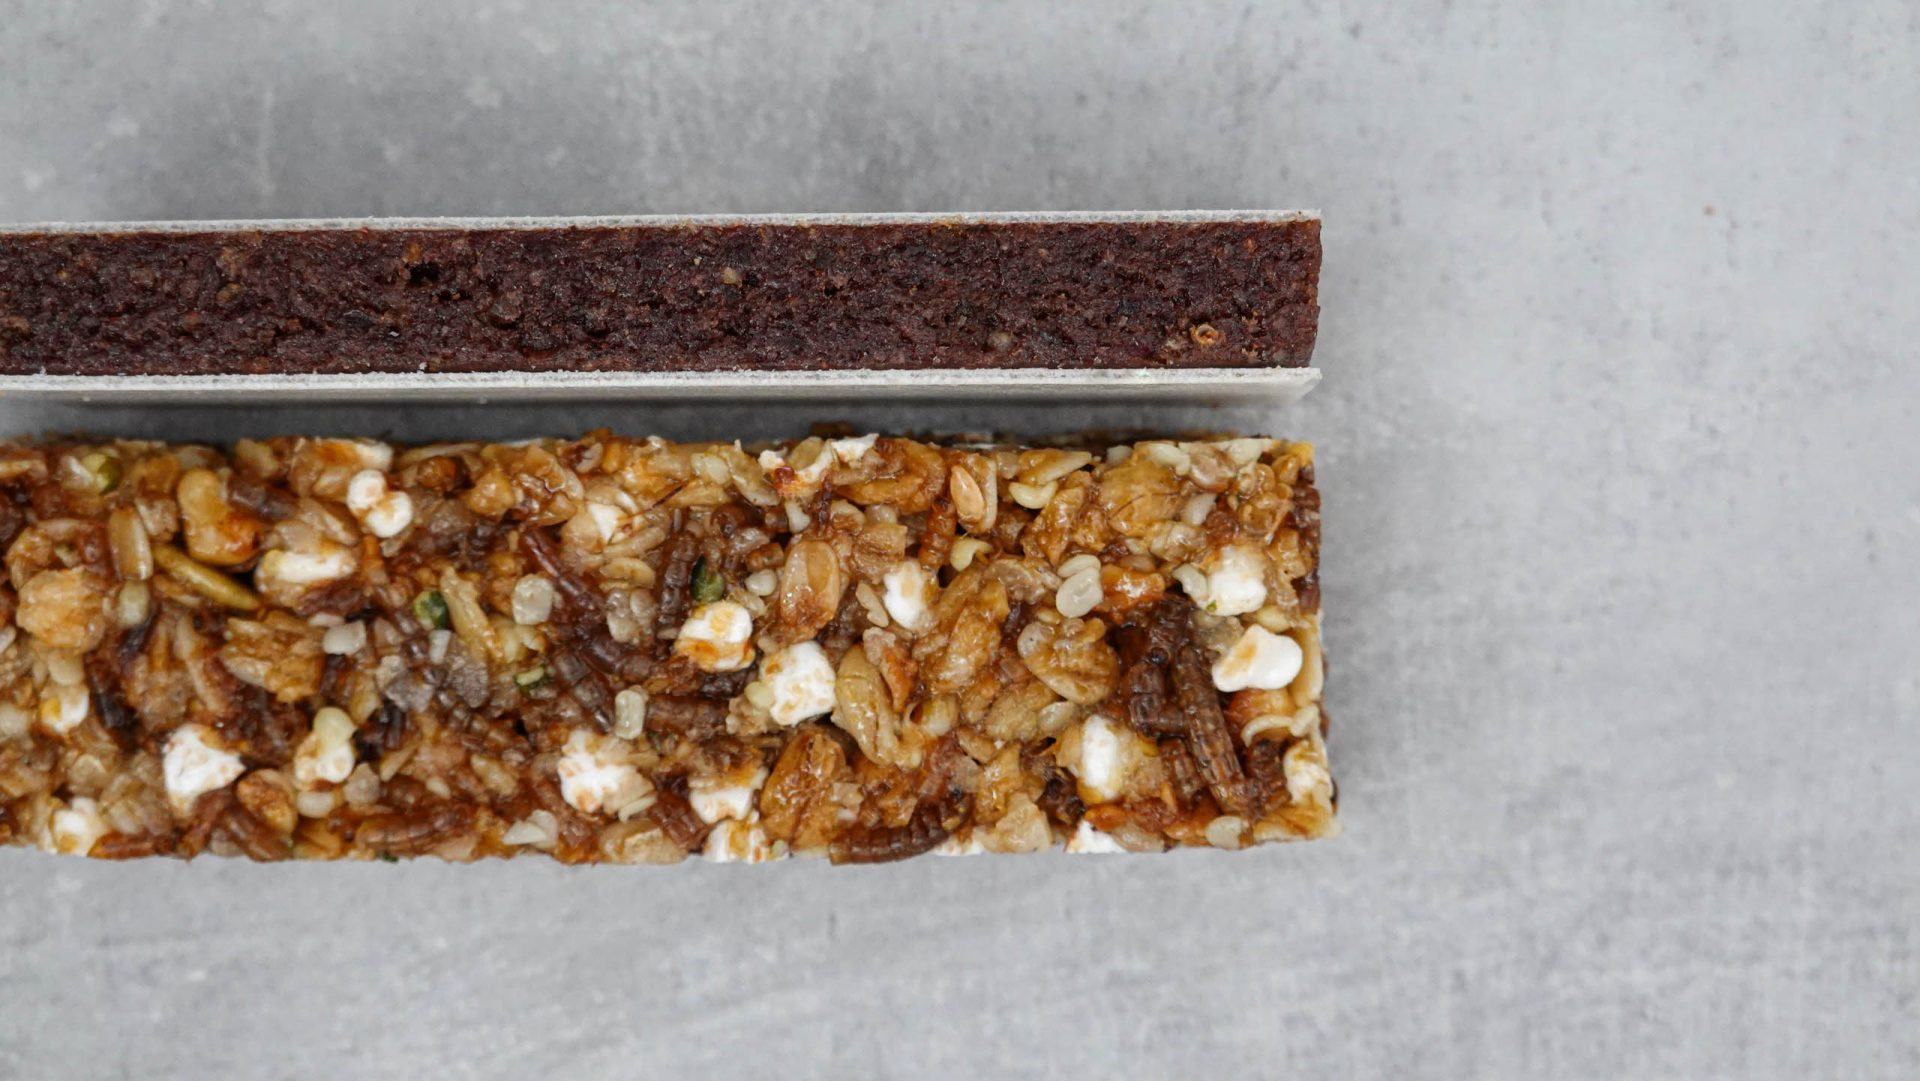 above the soft bar, below the bar with crunch